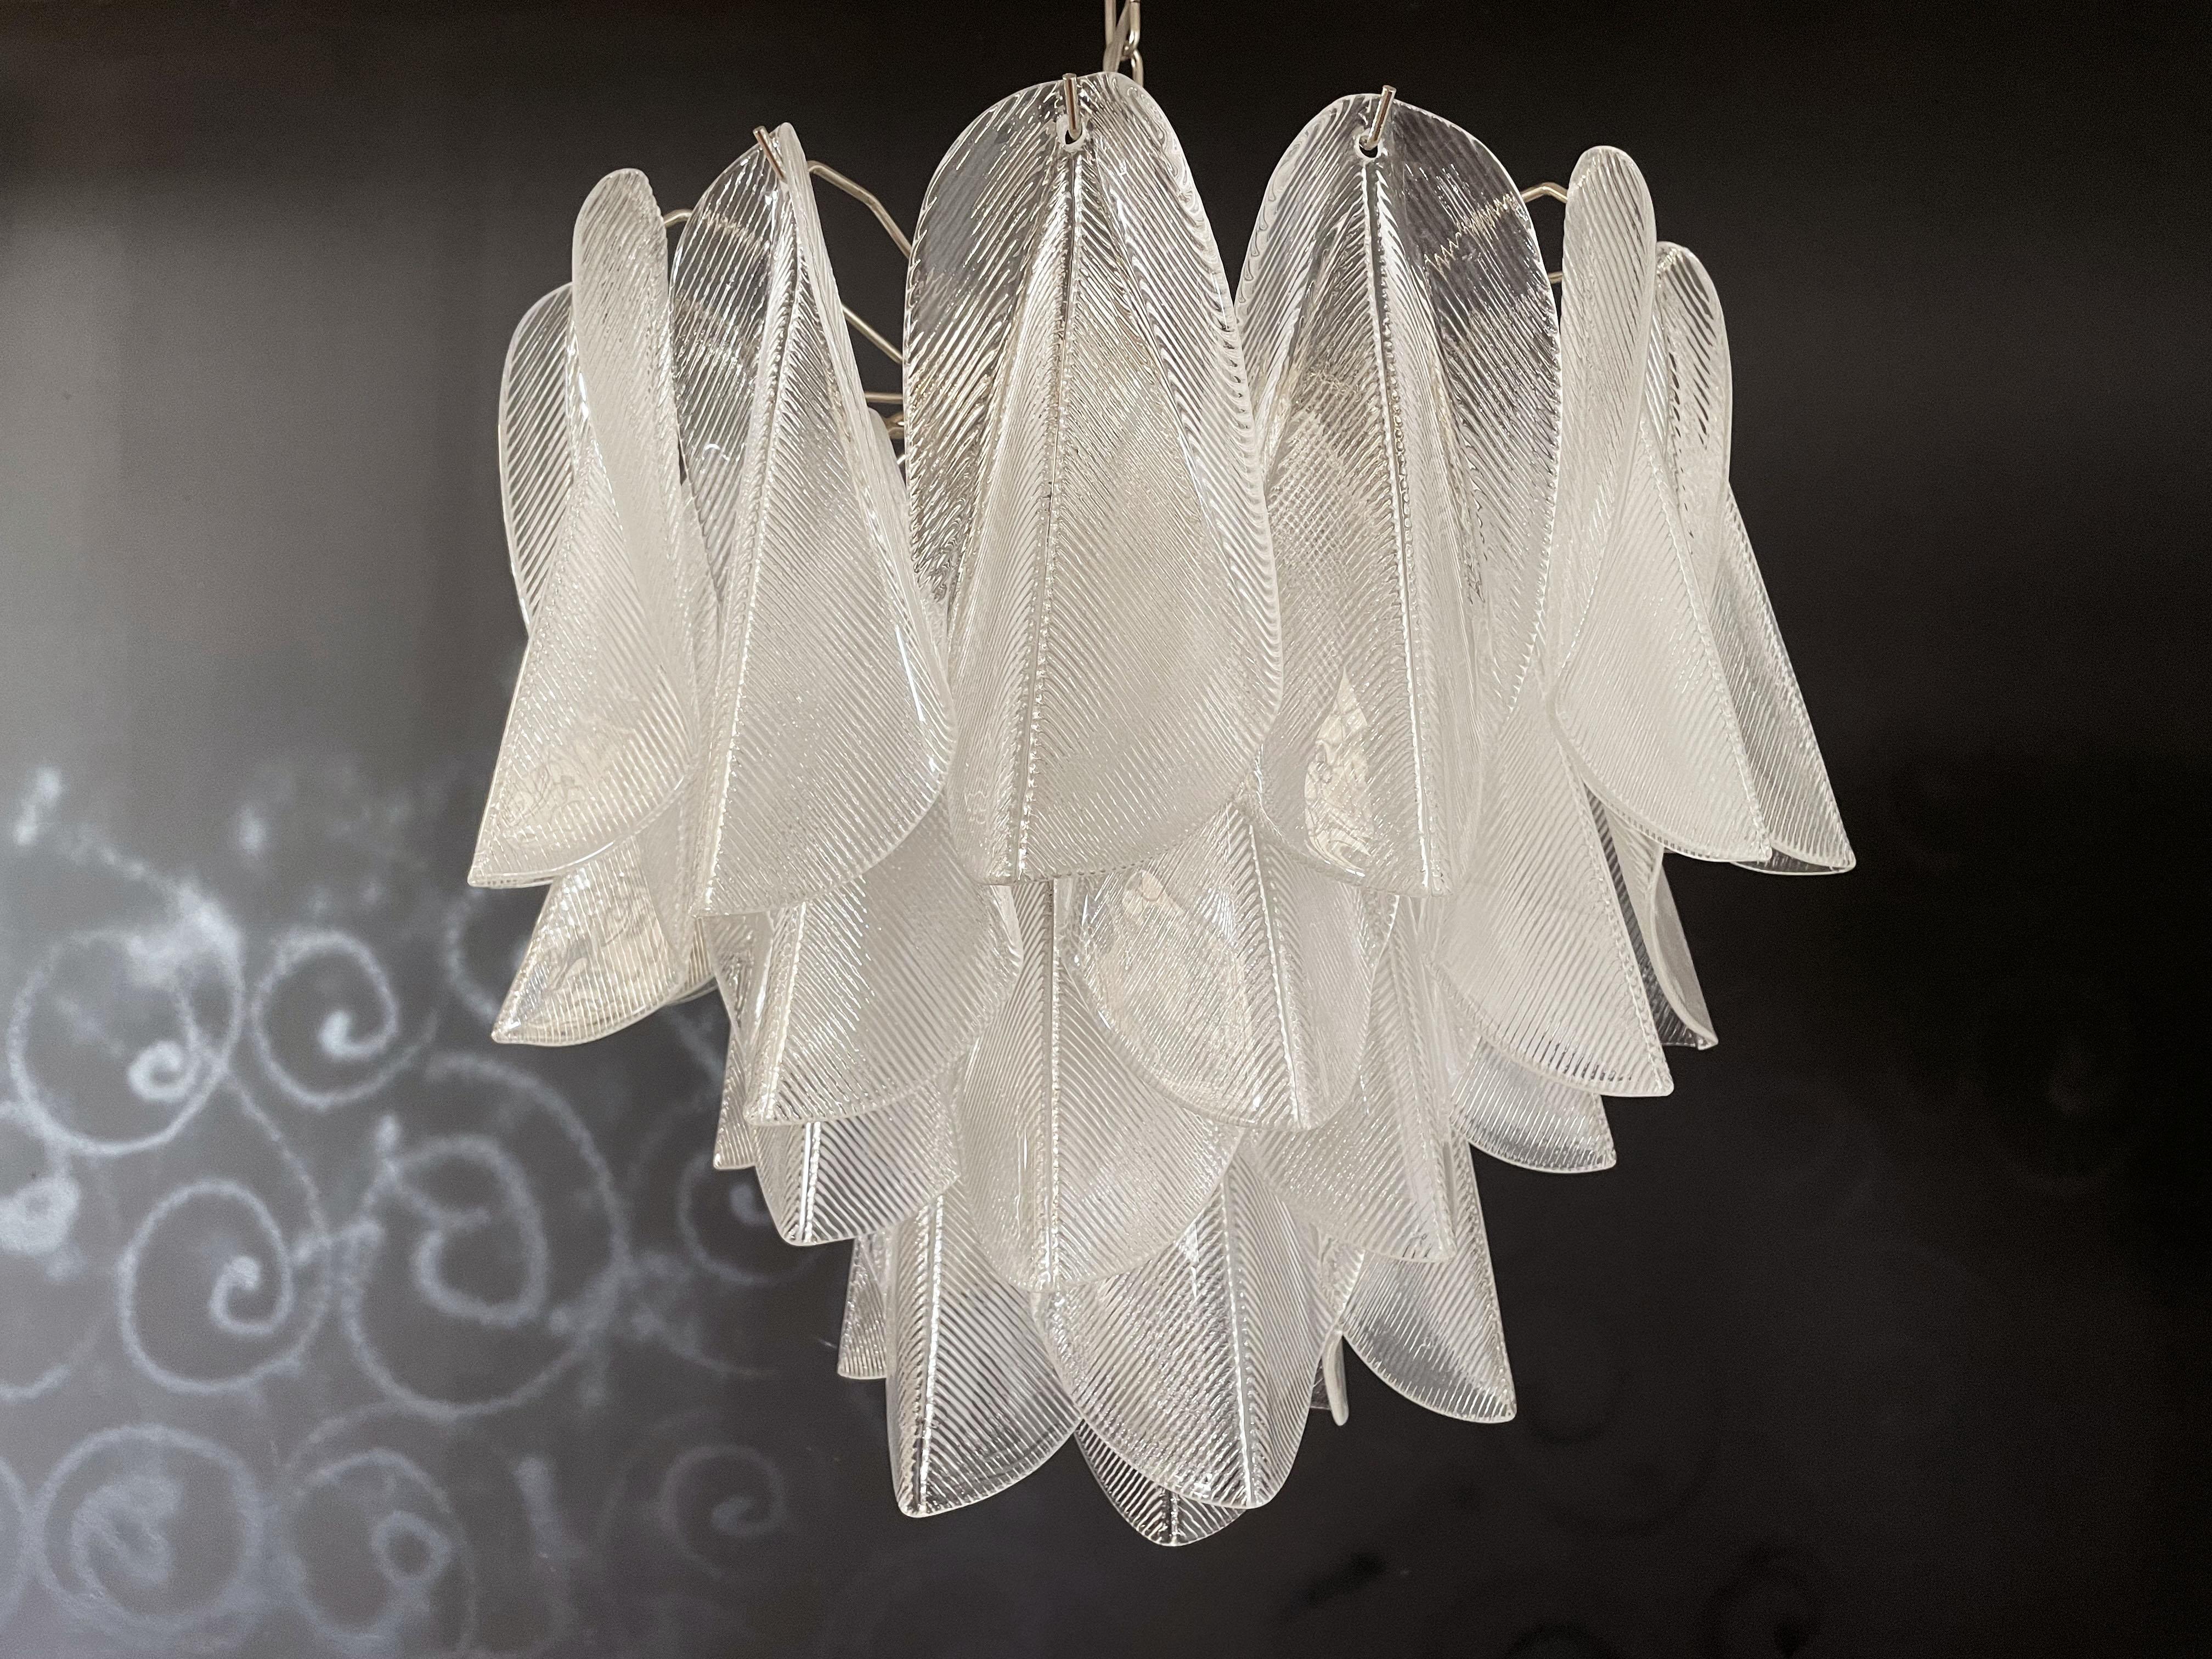 
Rare Italian vintage Murano chandelier. The fixture is made up of 41 individual handblown transparent glass elements hanging from a chrome frame.
Period: 1980's
Dimensions: 49,20 inches (125 cm) height with chain; 21,65 inches (55 cm) height